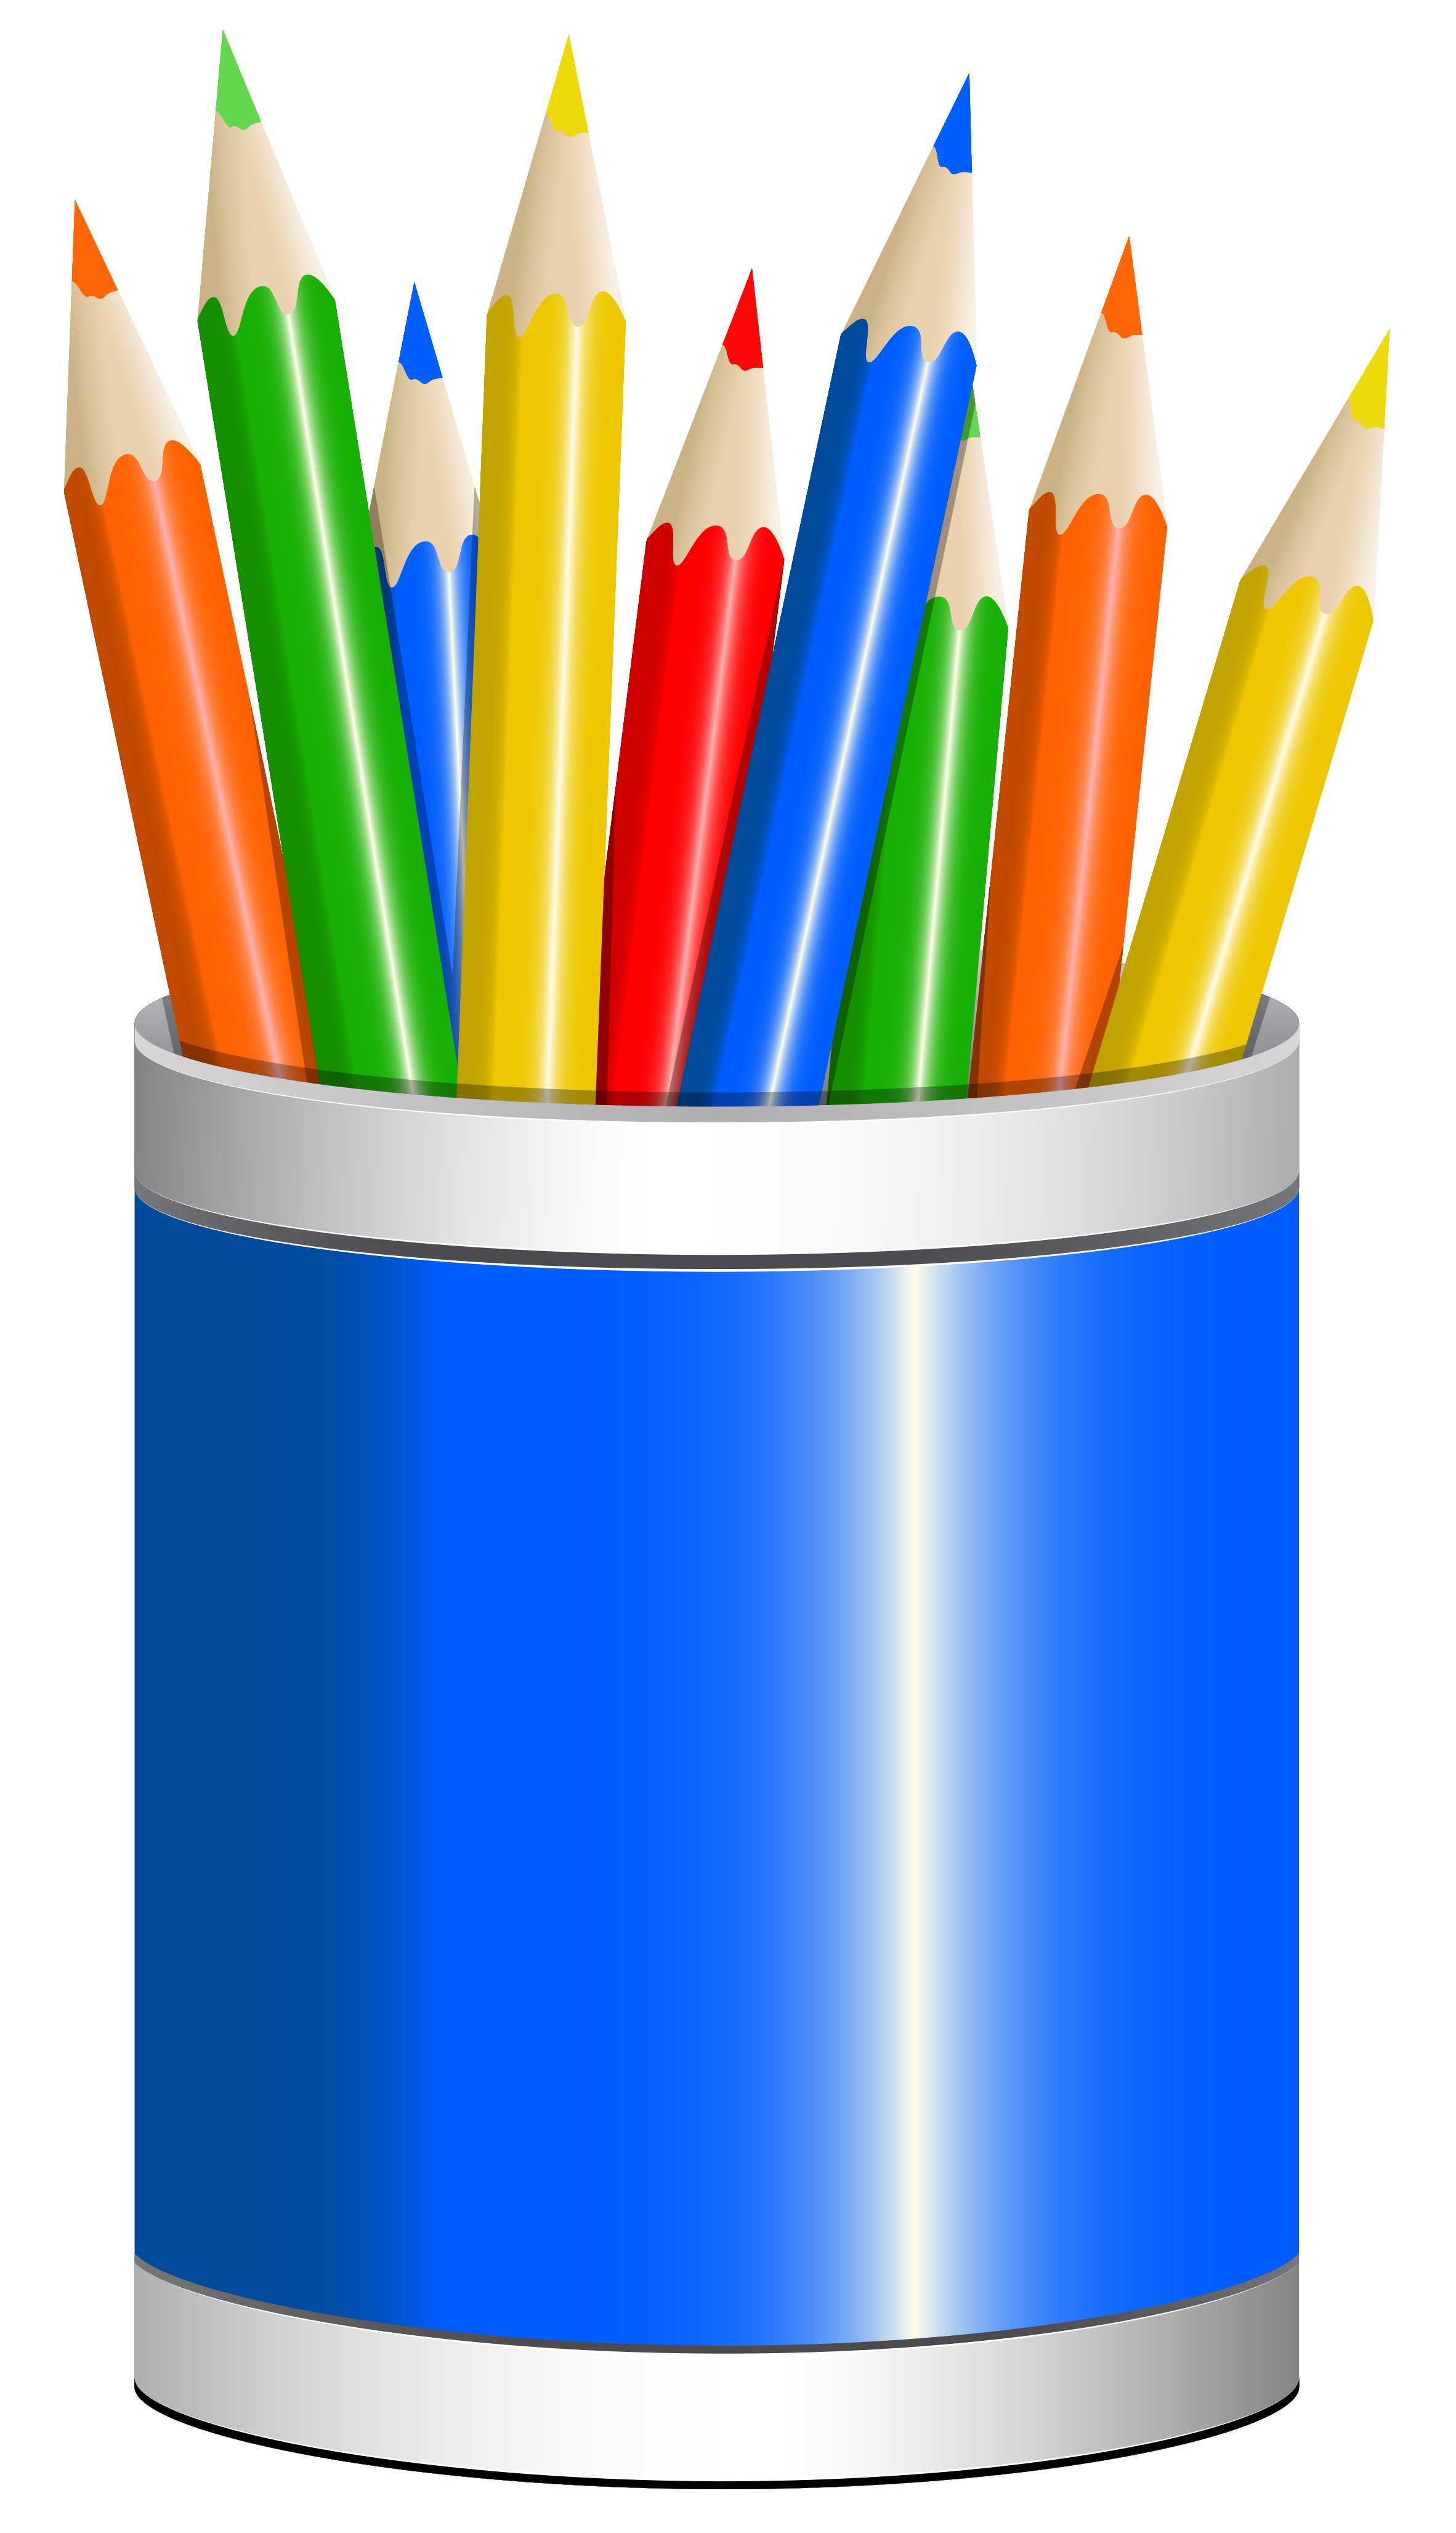 Blue Pencil Cup PNG Clipart Image | Gallery Yopriceville - High-Quality